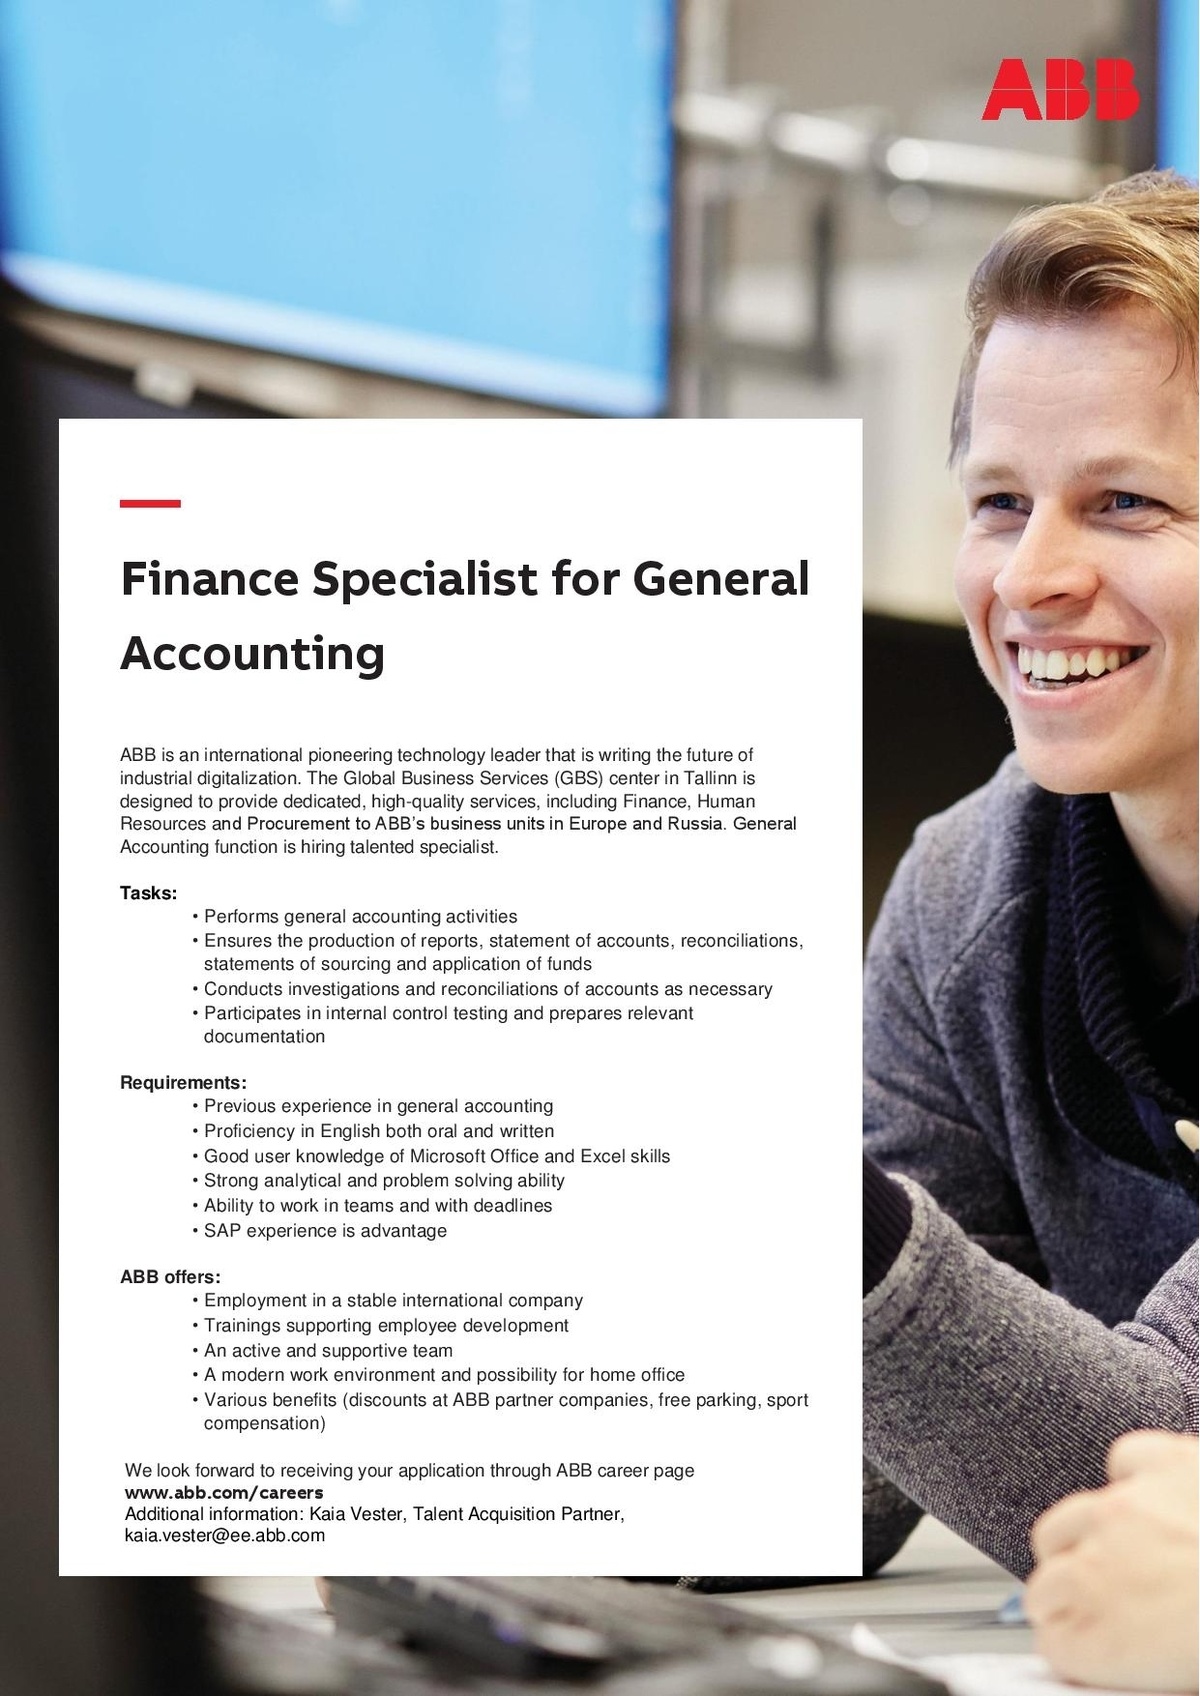 ABB AS Finance Specialist for General Accounting